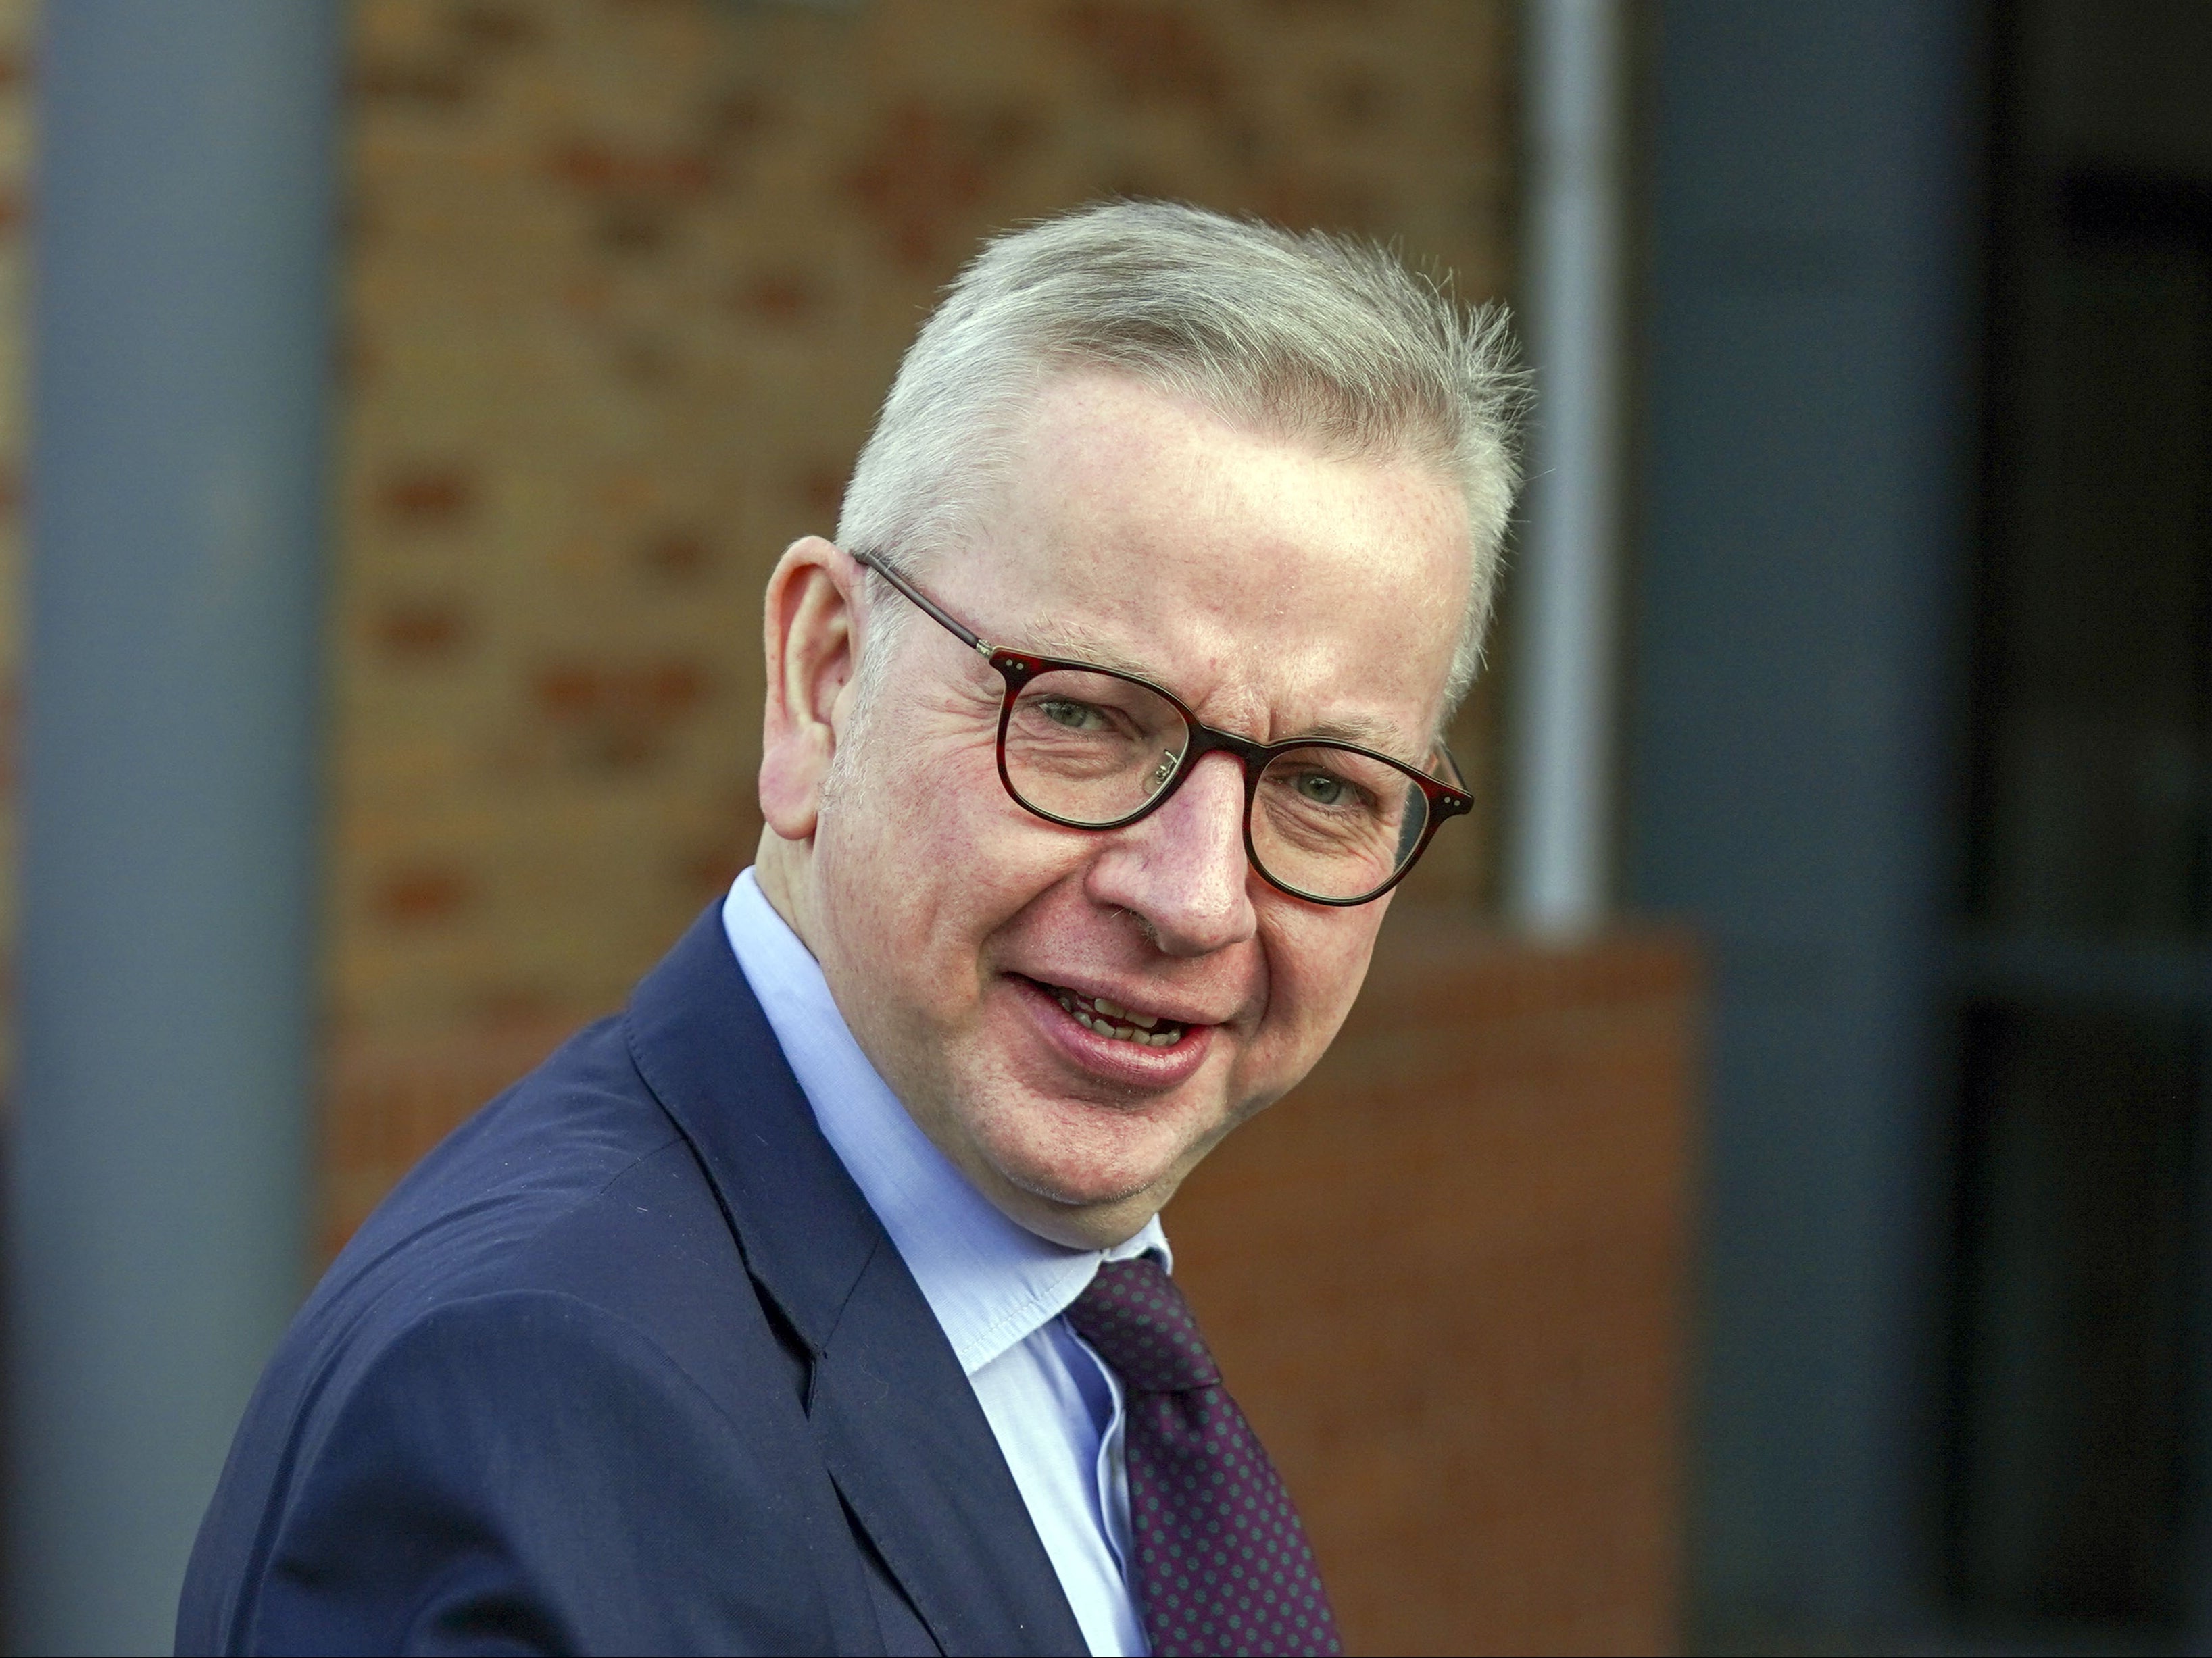 Cabinet minister Michael Gove